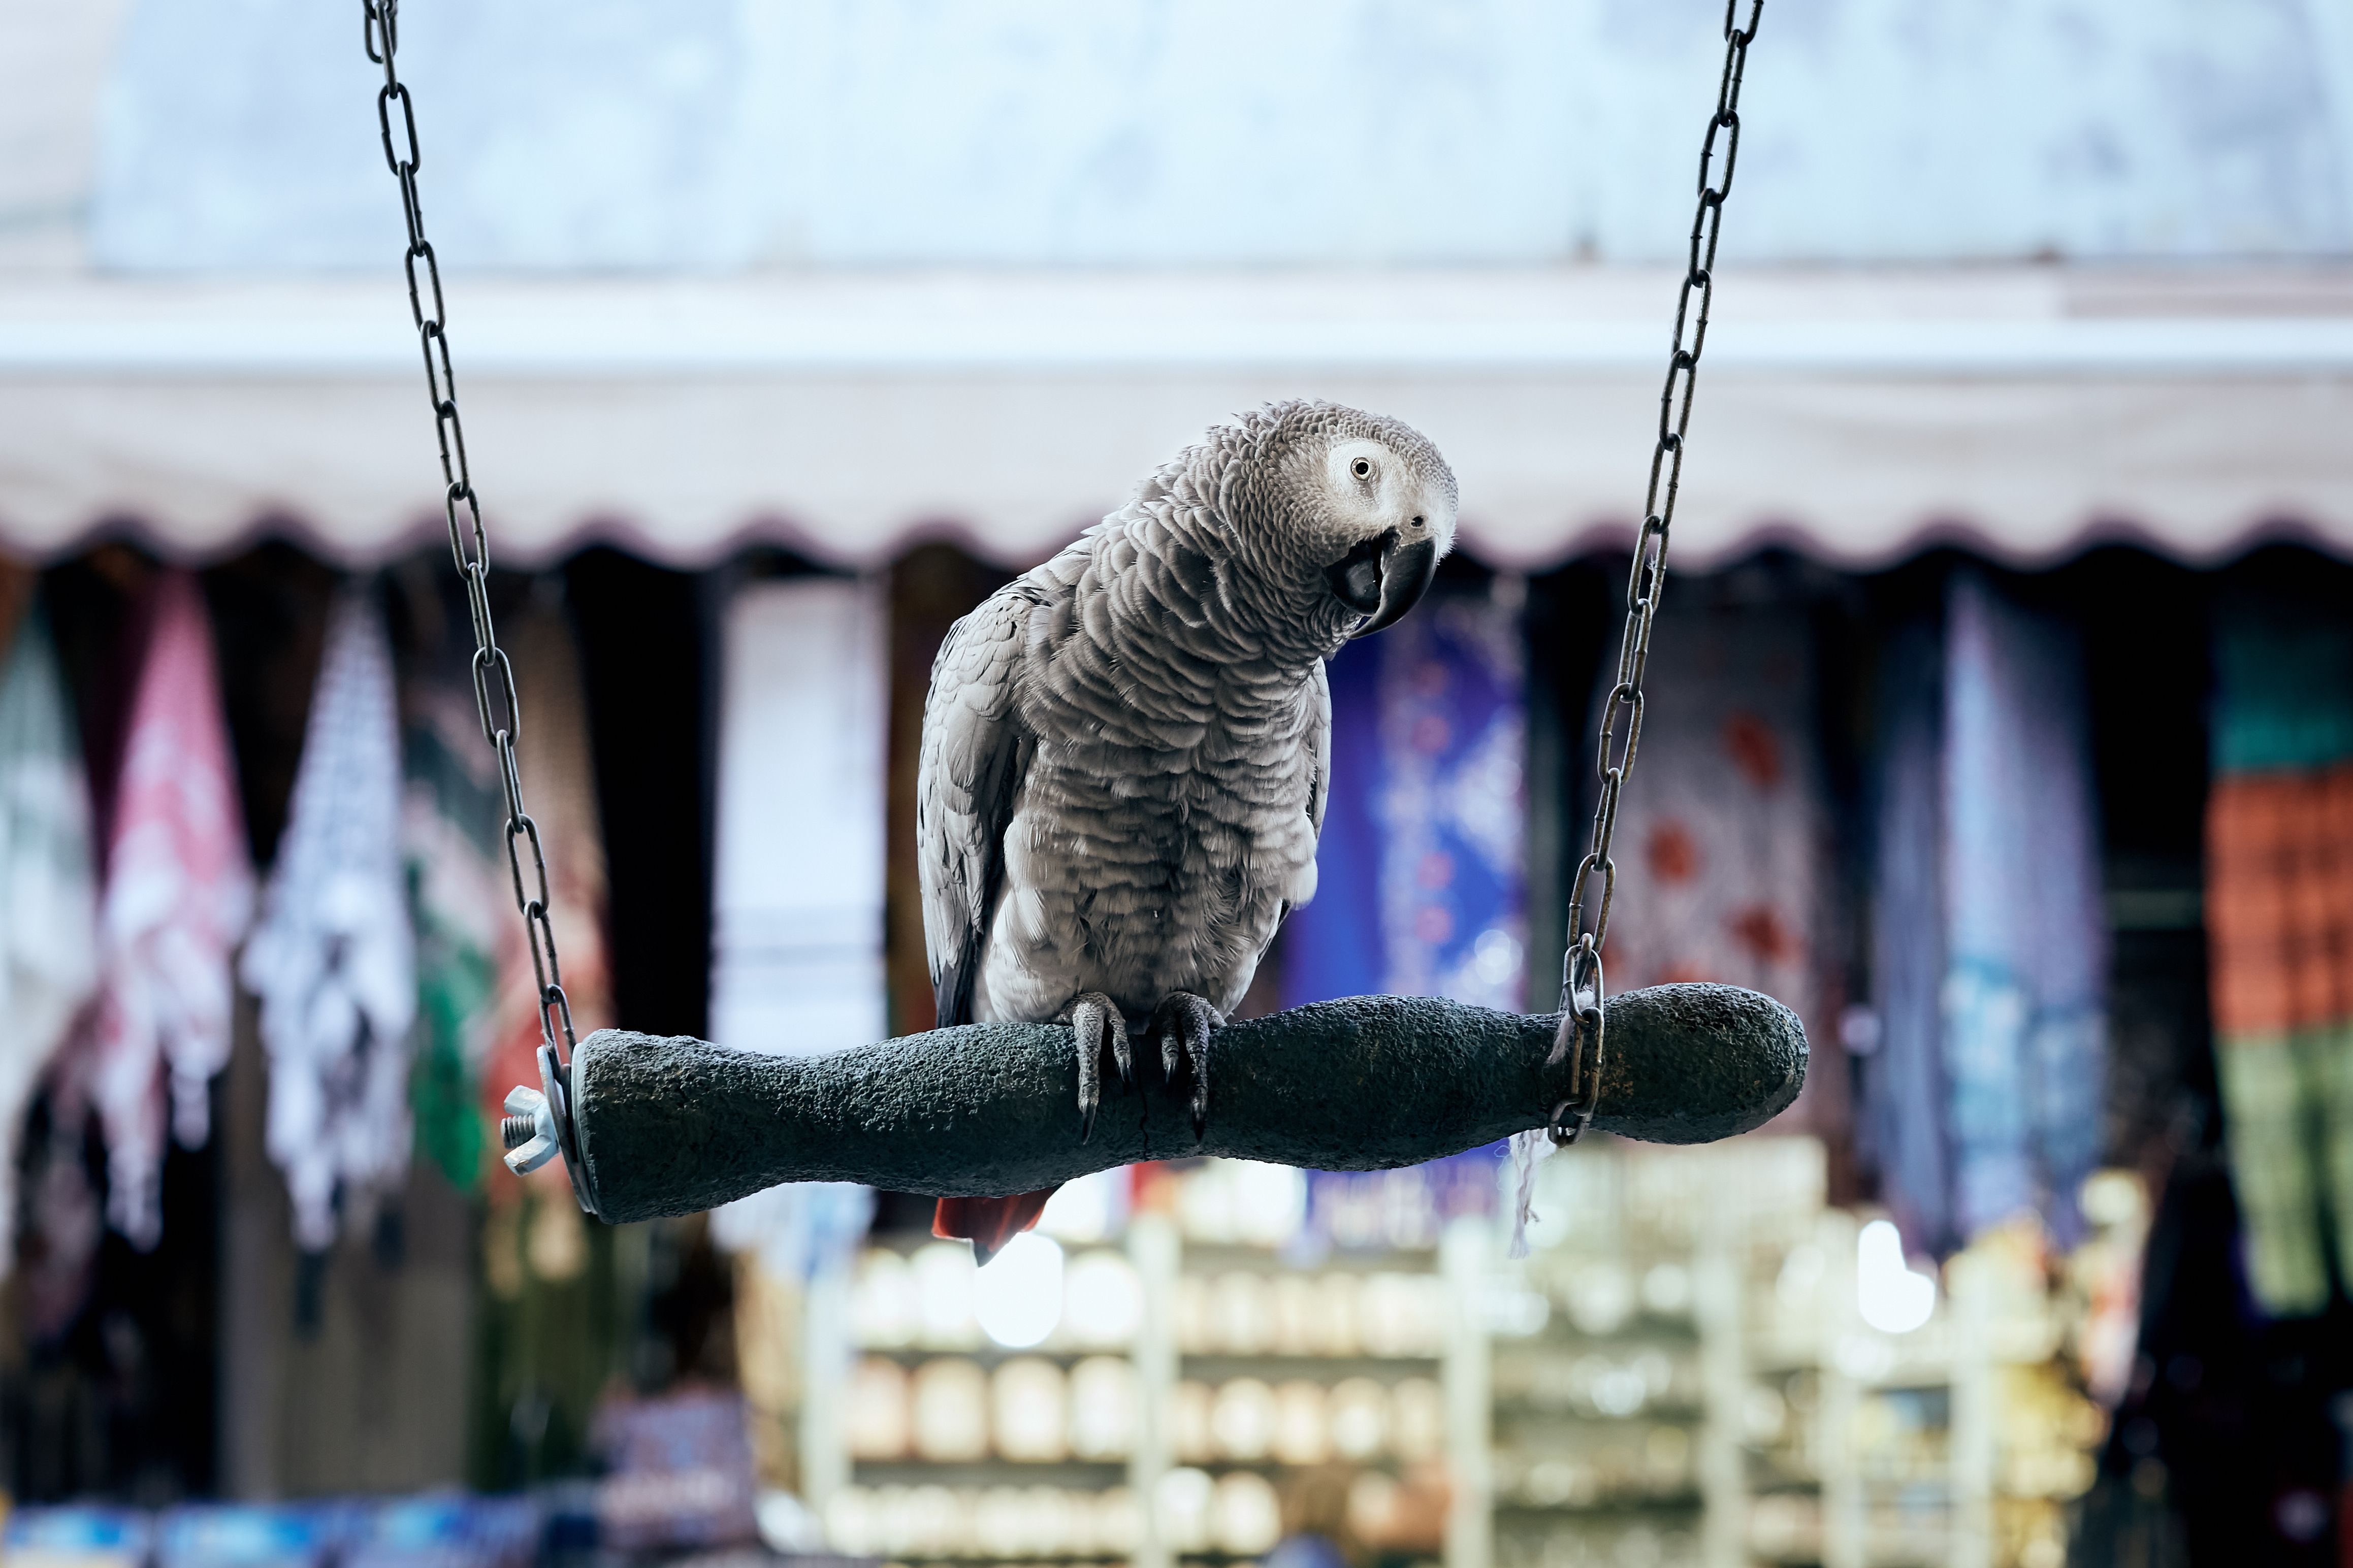 Grey parrot on a swing